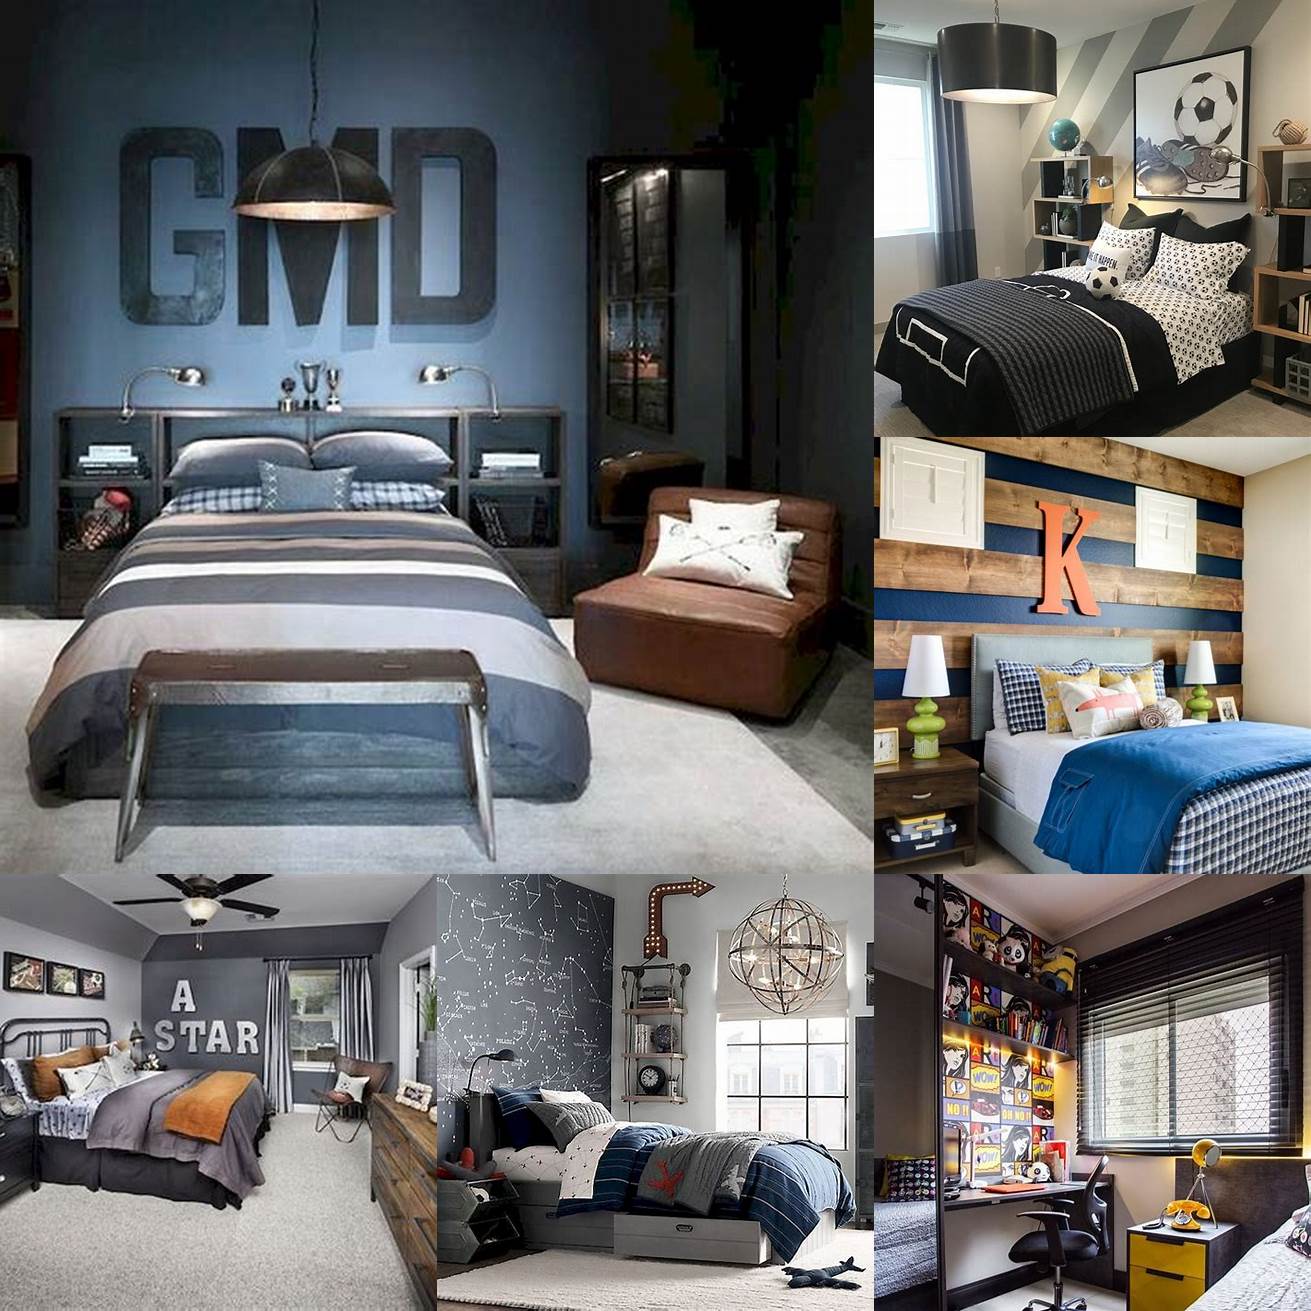 Style Choose a style that fits your boys personality and the room décor